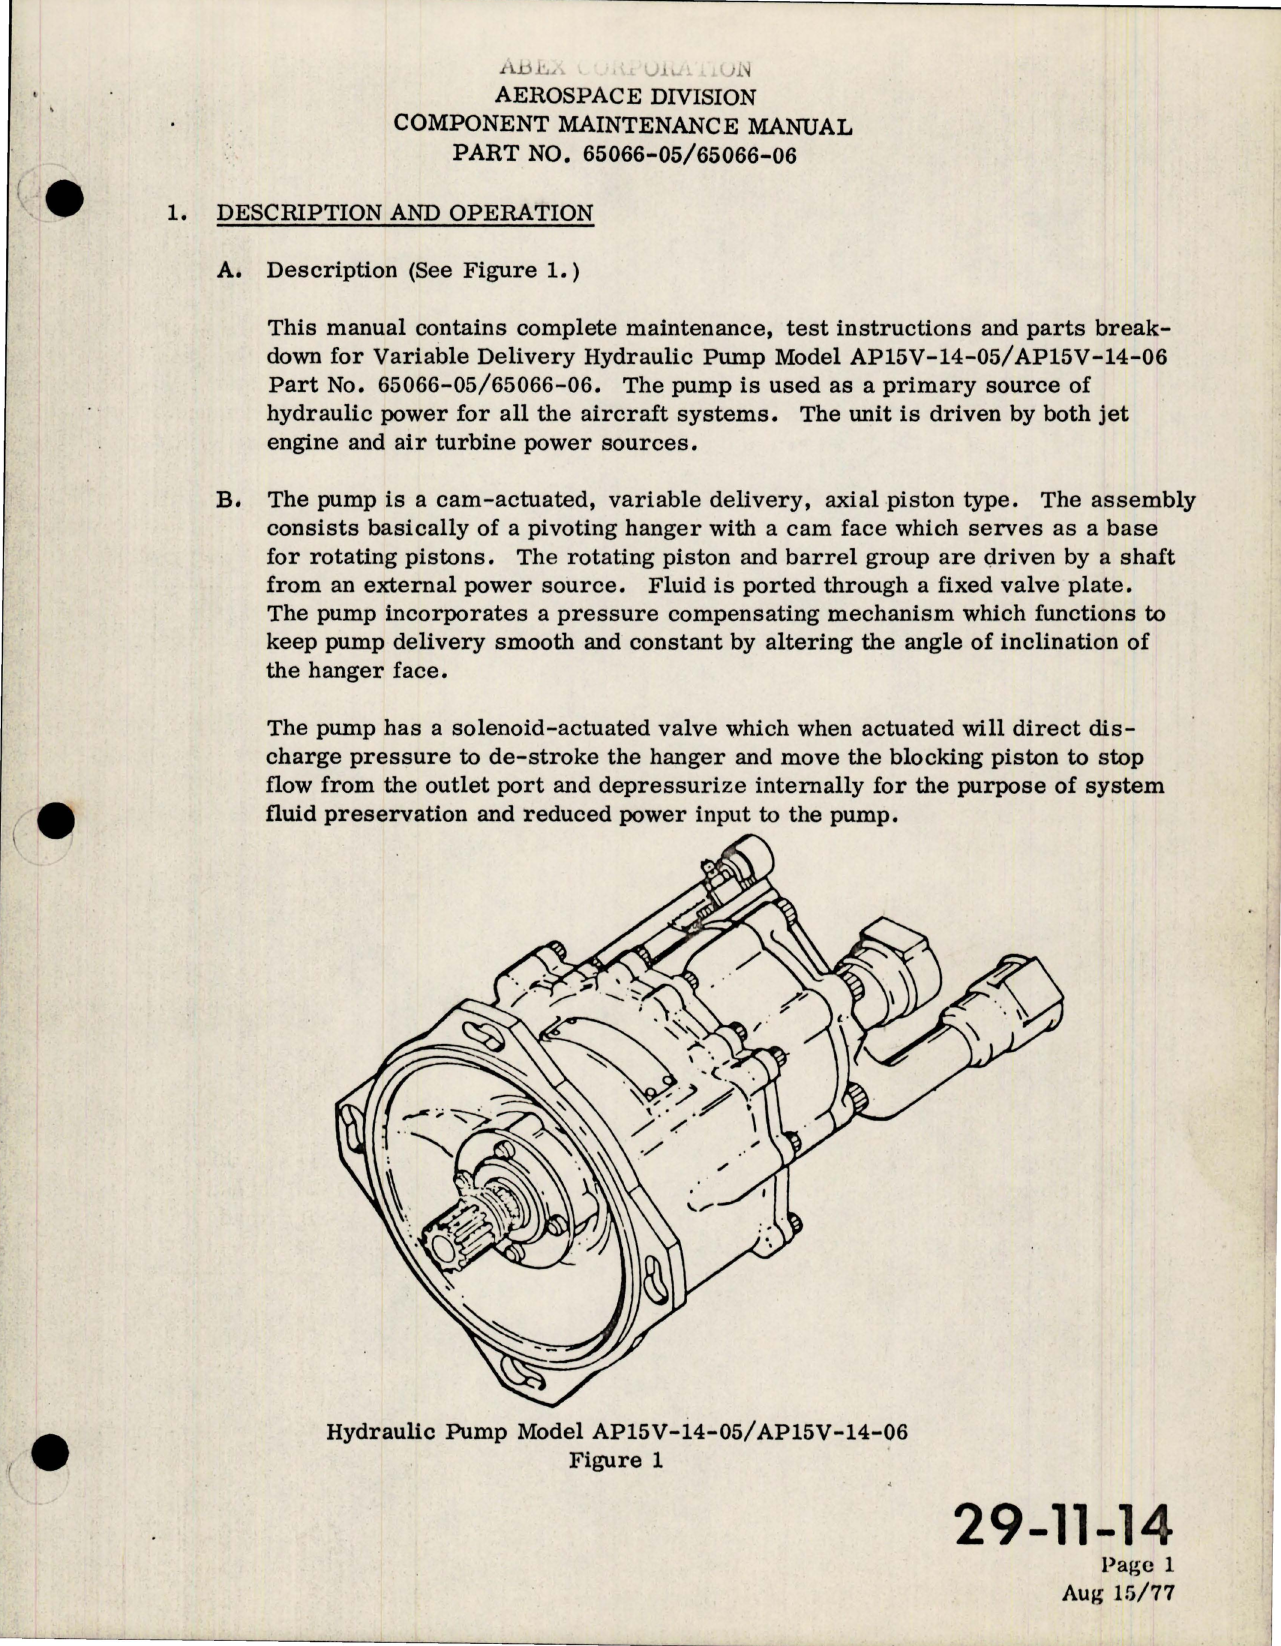 Sample page 9 from AirCorps Library document: Maintenance Manual for Hydraulic Pump - Parts 65066-05 and 65066-06